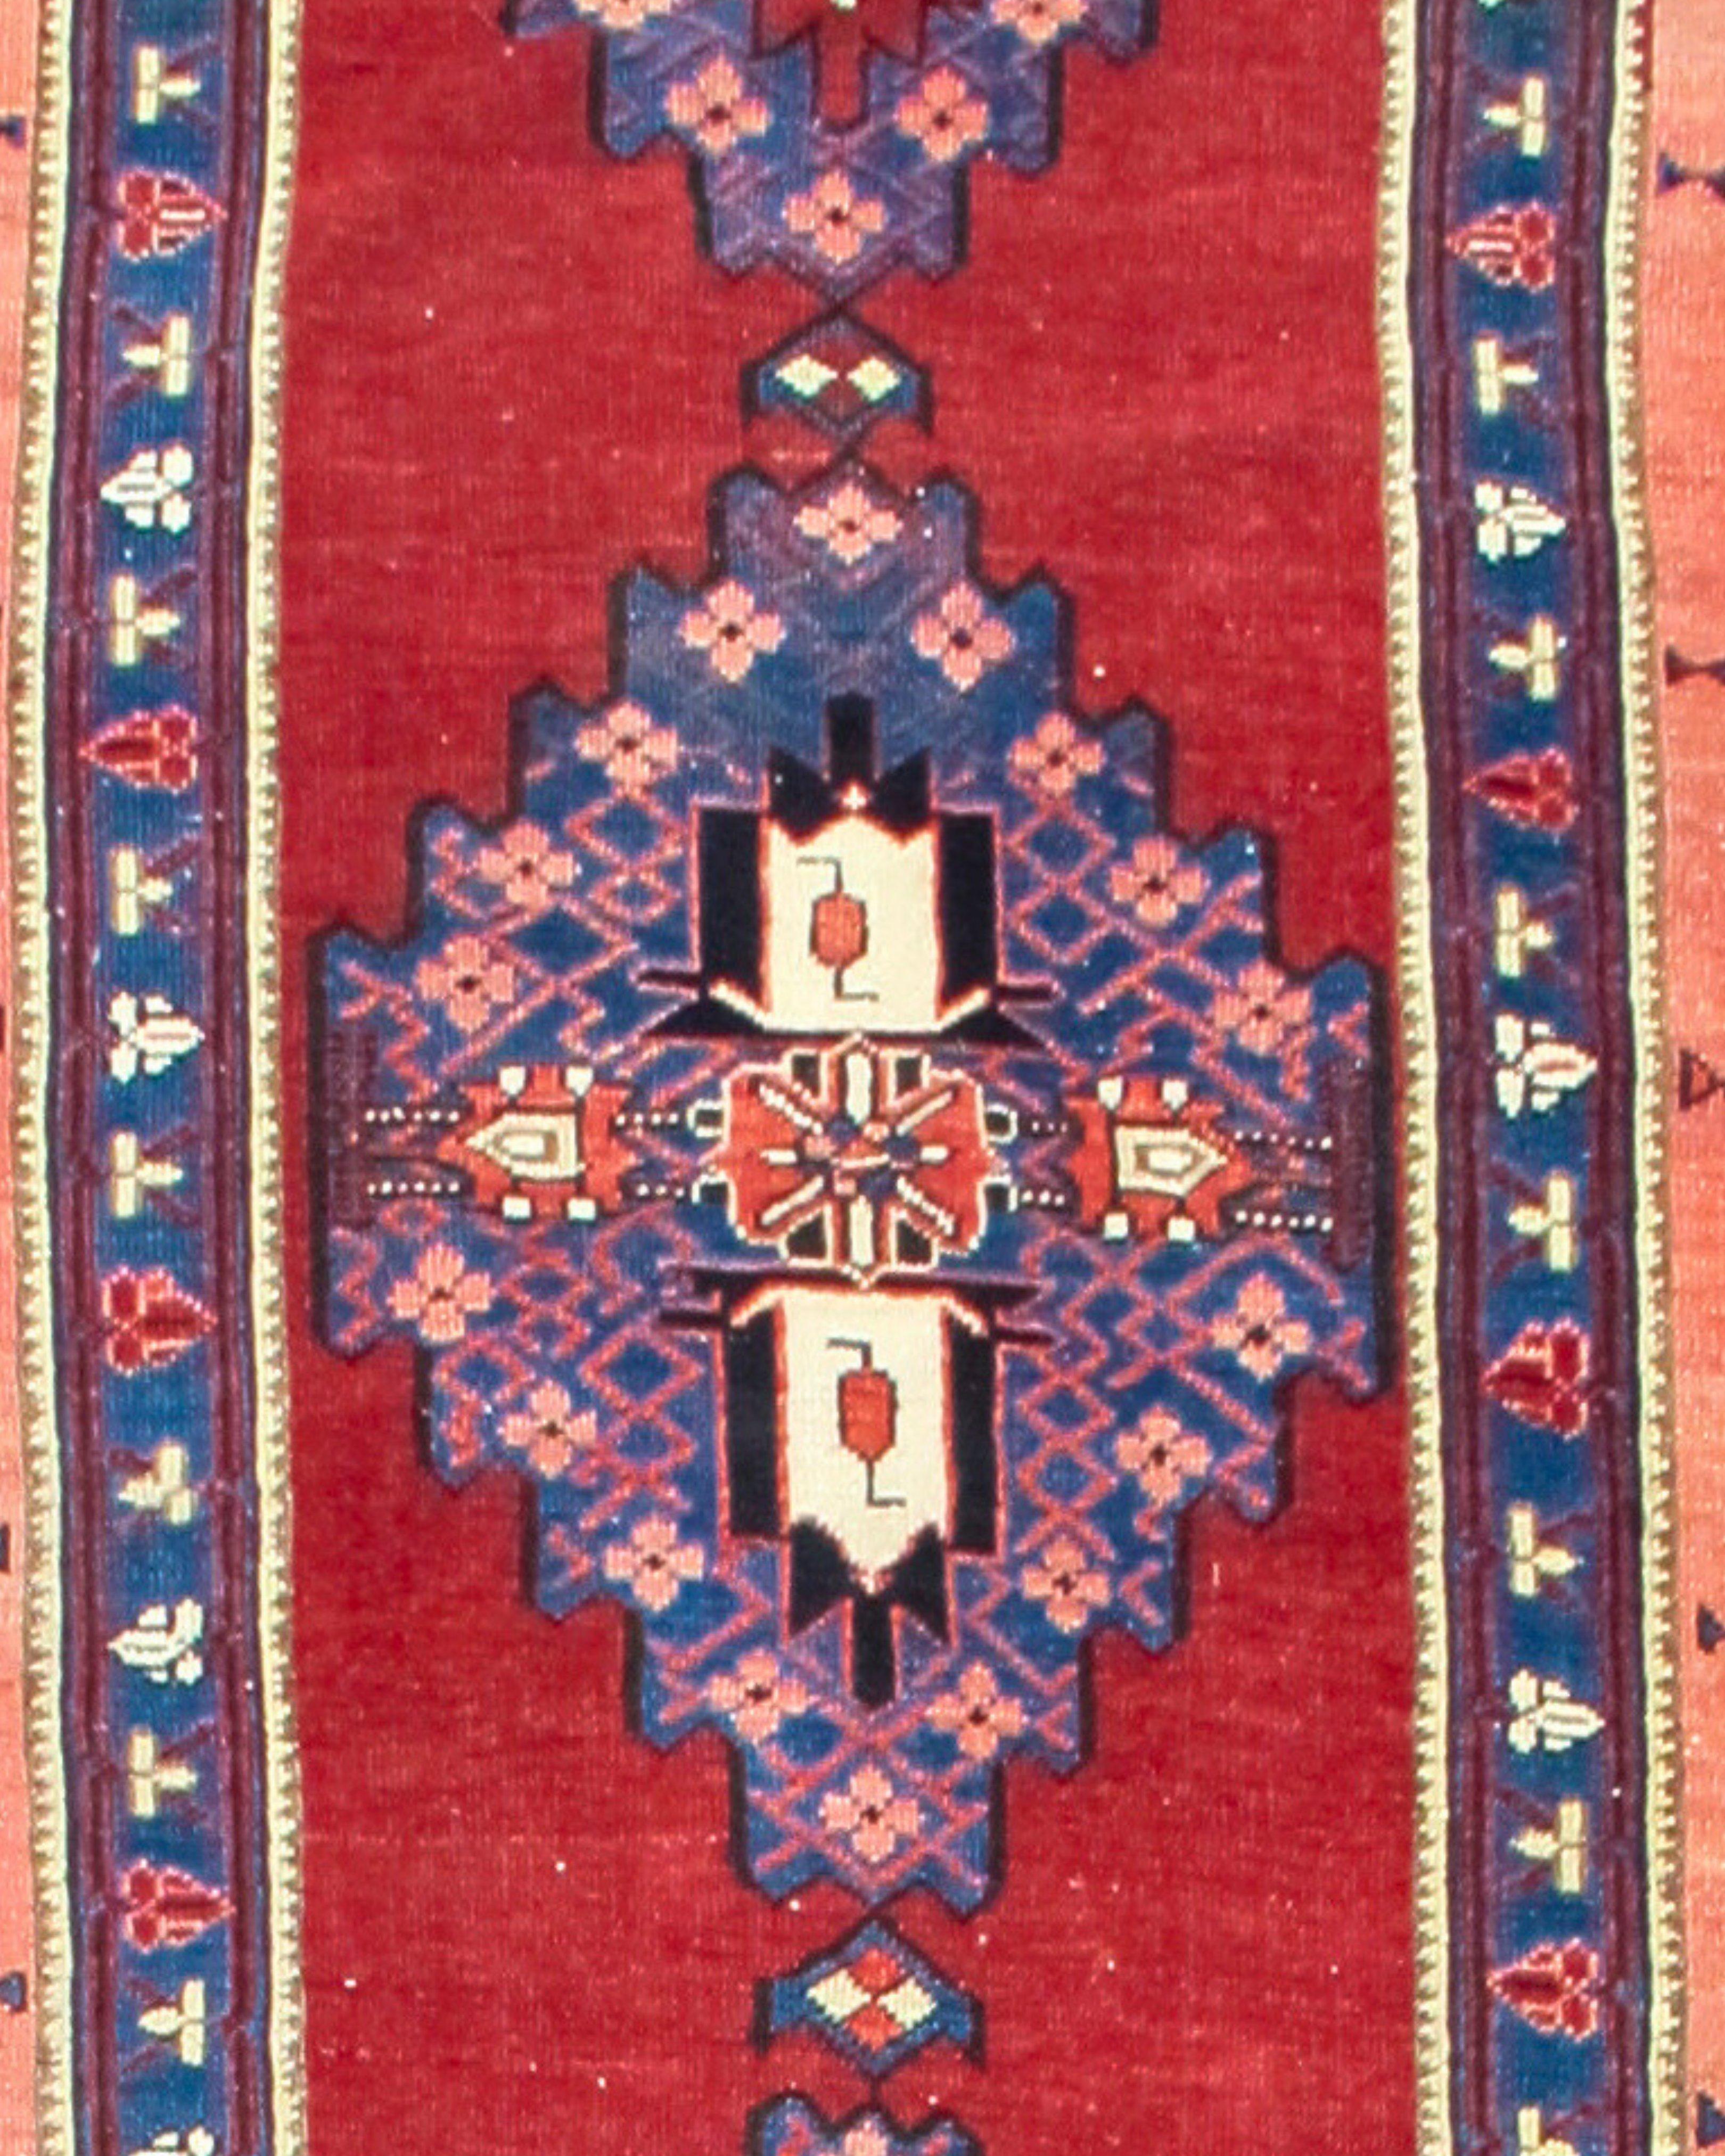 Antique Persian Serab Runner Rug, c. 1900

Additional Information:
Dimensions: 3'4